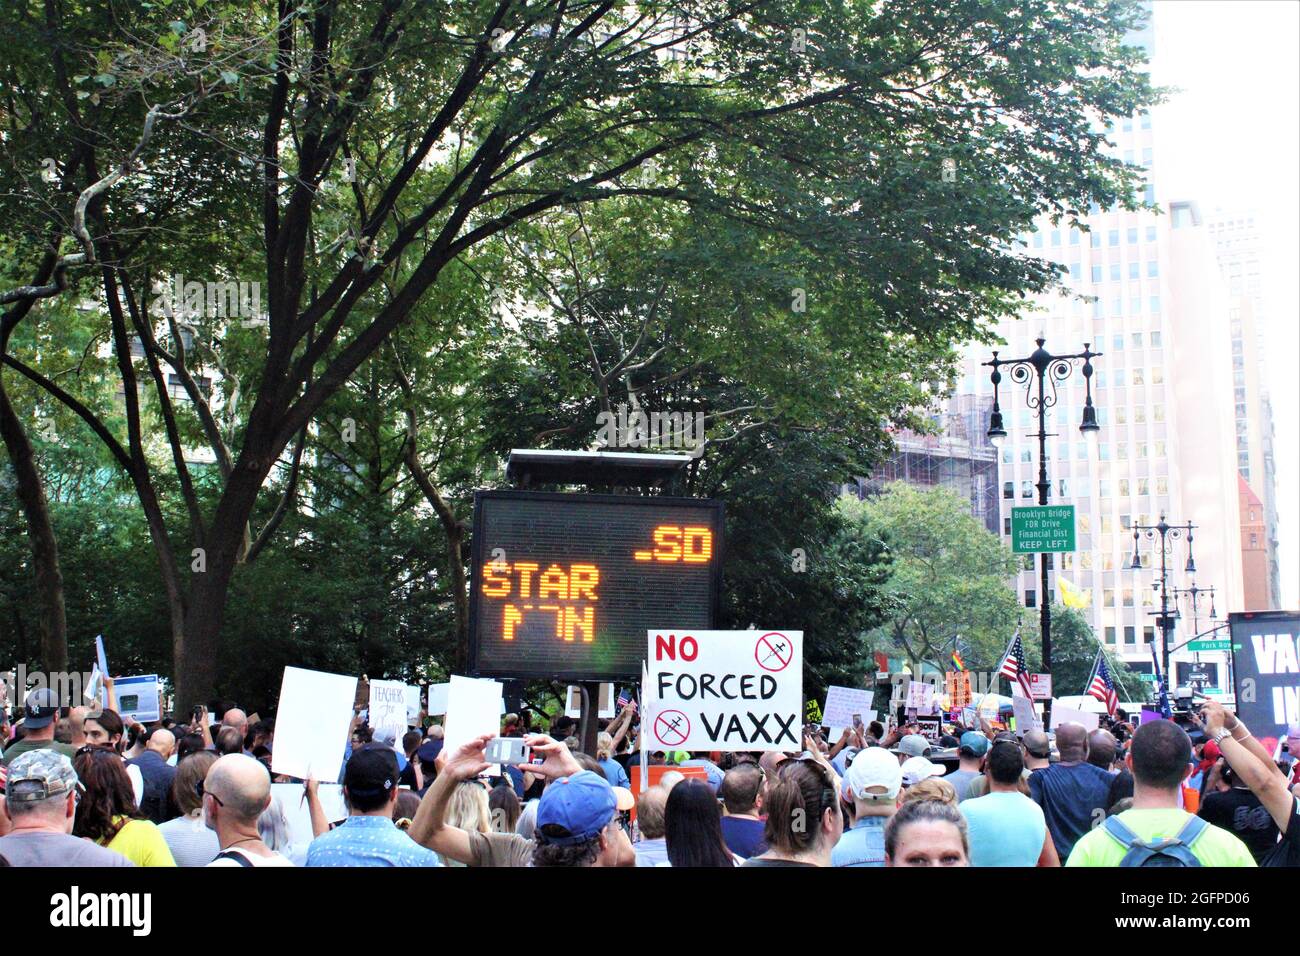 New York, NY. USA August 25th 2021 Around 1000 people gathered for NYC COVID Vaccine Mandate Protest In NYC, The group included members of New York City teachers and school union employees they gathered outside the mayor's office to protest a vaccine mandate announced by the city health and education departments this week. Credit: Mark Apollo/Alamy Live News Stock Photo